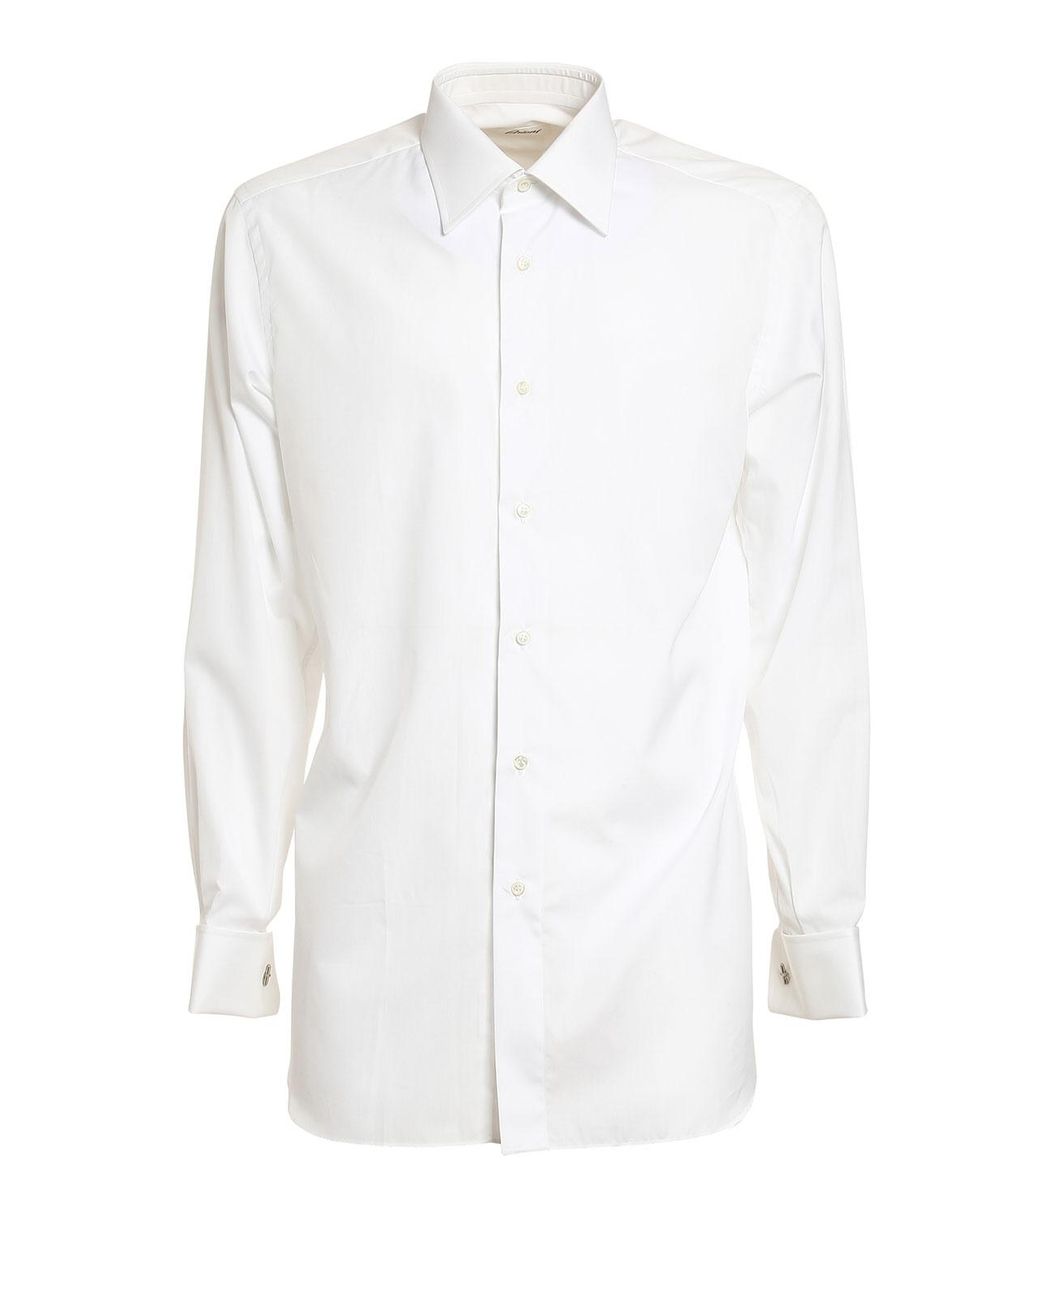 Brioni Cotton French Cuffs Shirt in White for Men - Lyst